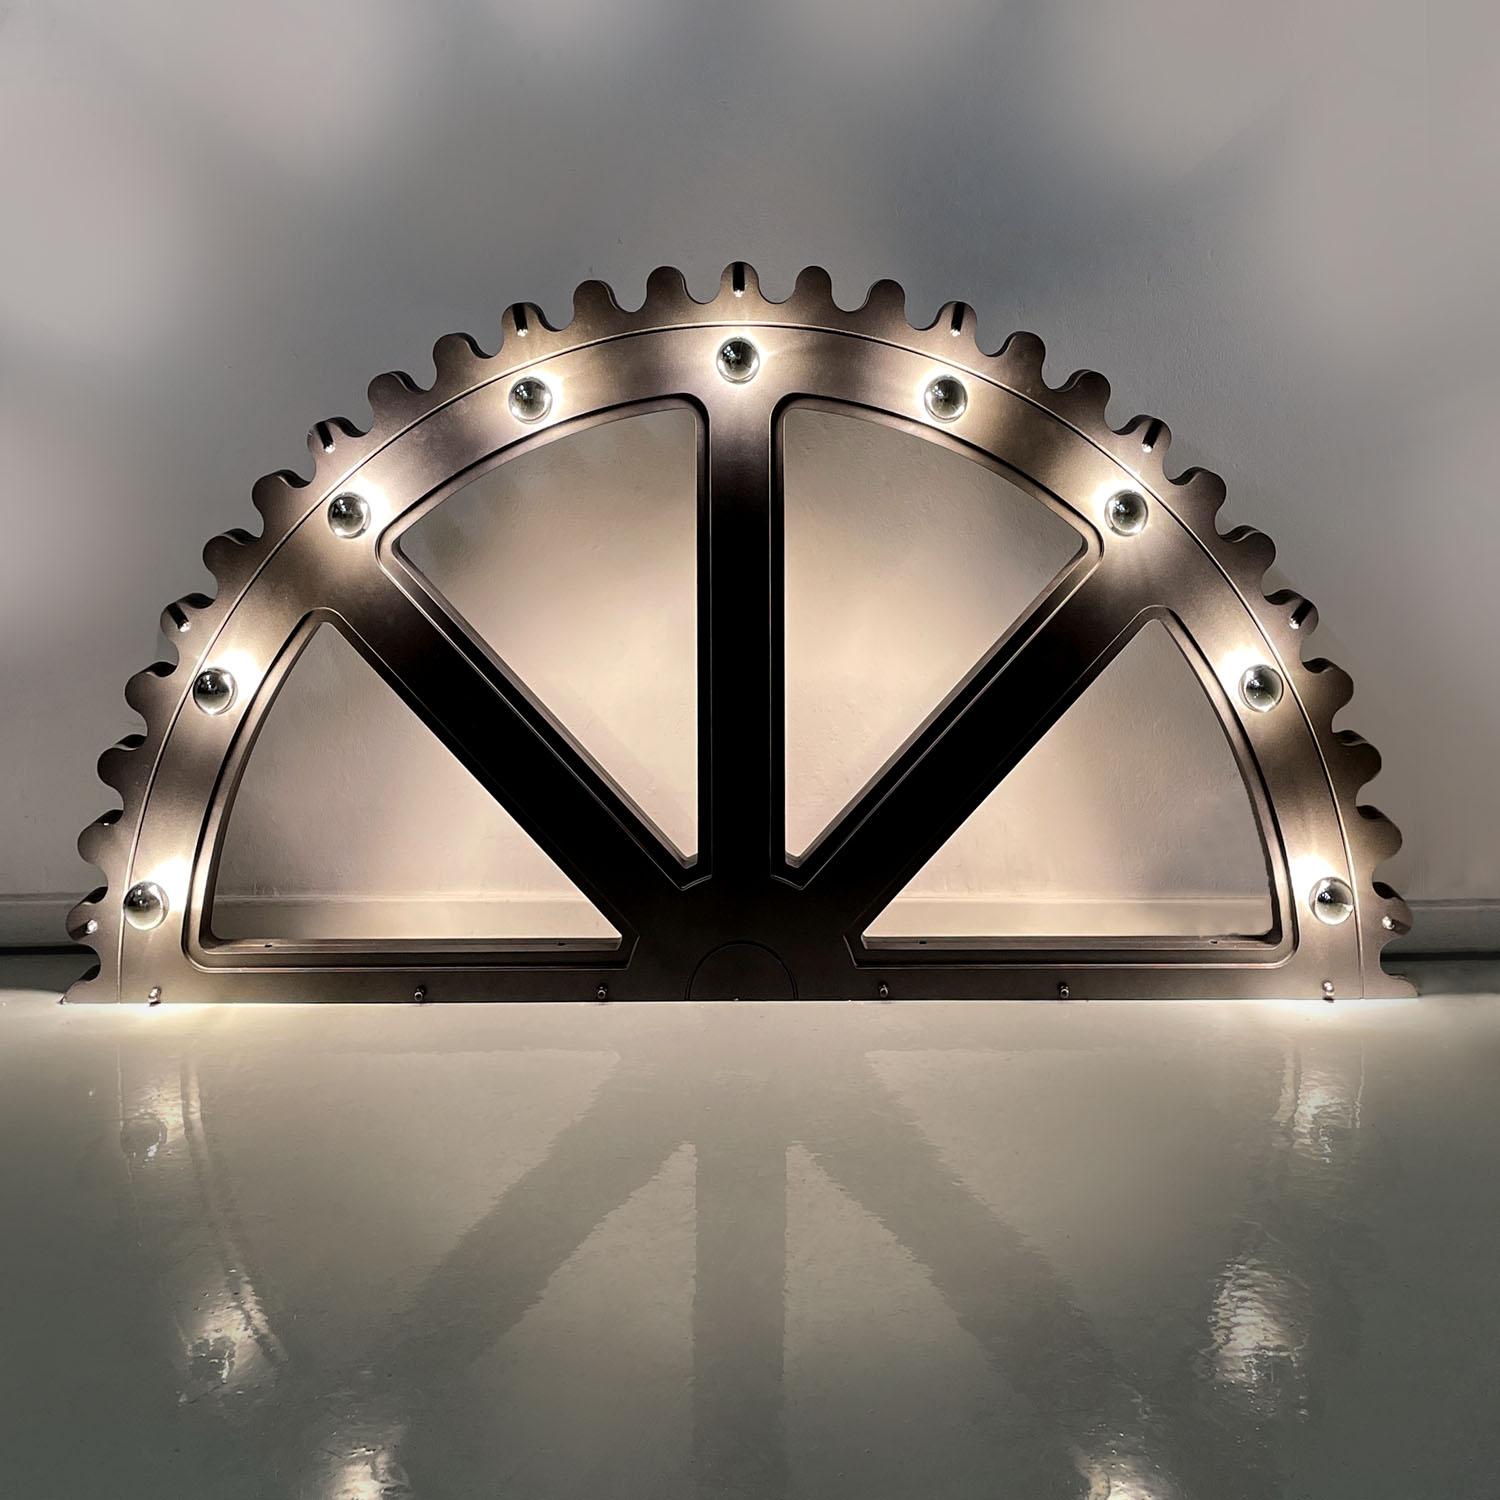 Italian post-modern illuminated glitter grey semicircle mechanism prop, 2020s
Illuminated semicircle prop made of mdf. This prop represents half of a mechanism or a wheel, and is lacquered dark gray with a glitter finish. There are nine light